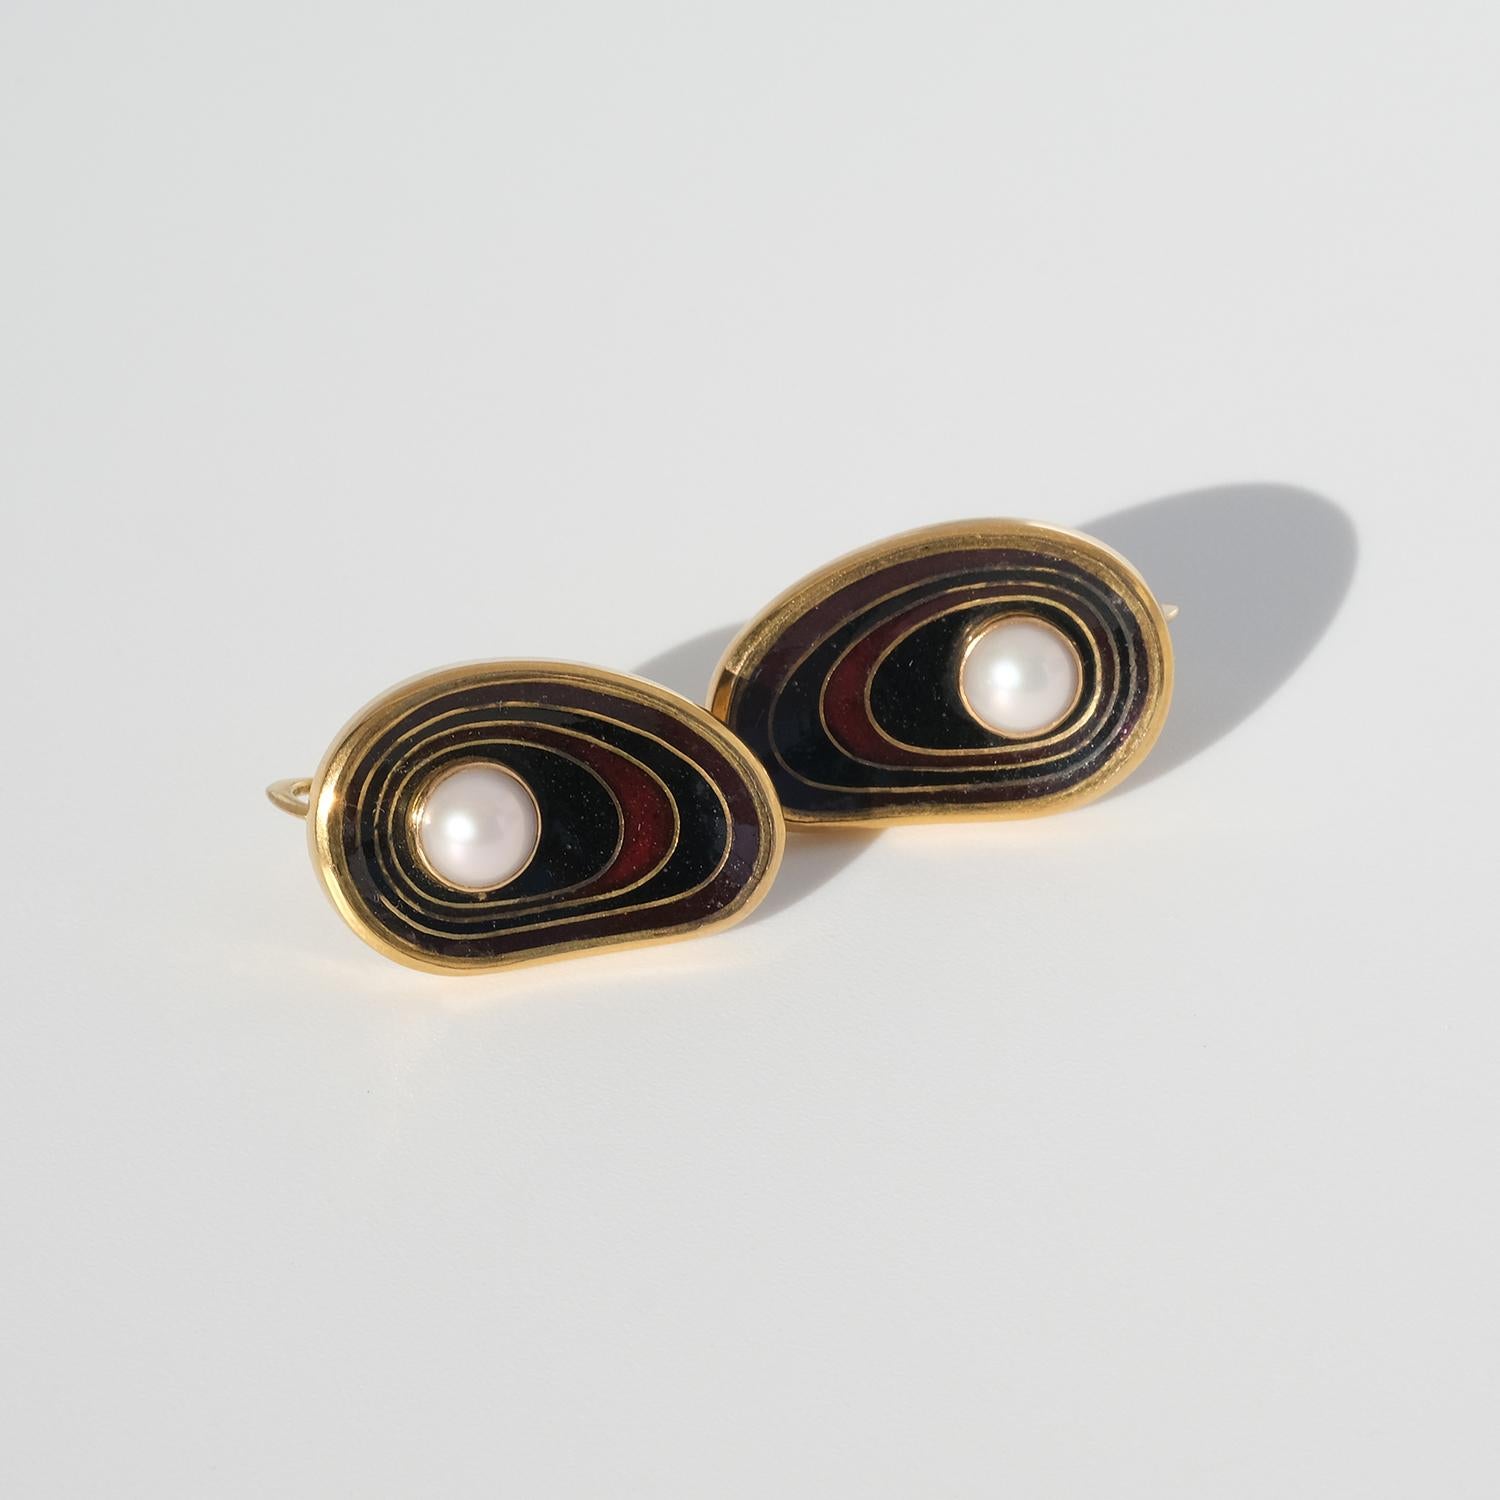 Pair of Swedish Earrings Made by Sigurd Persson, Made 1951 For Sale 3